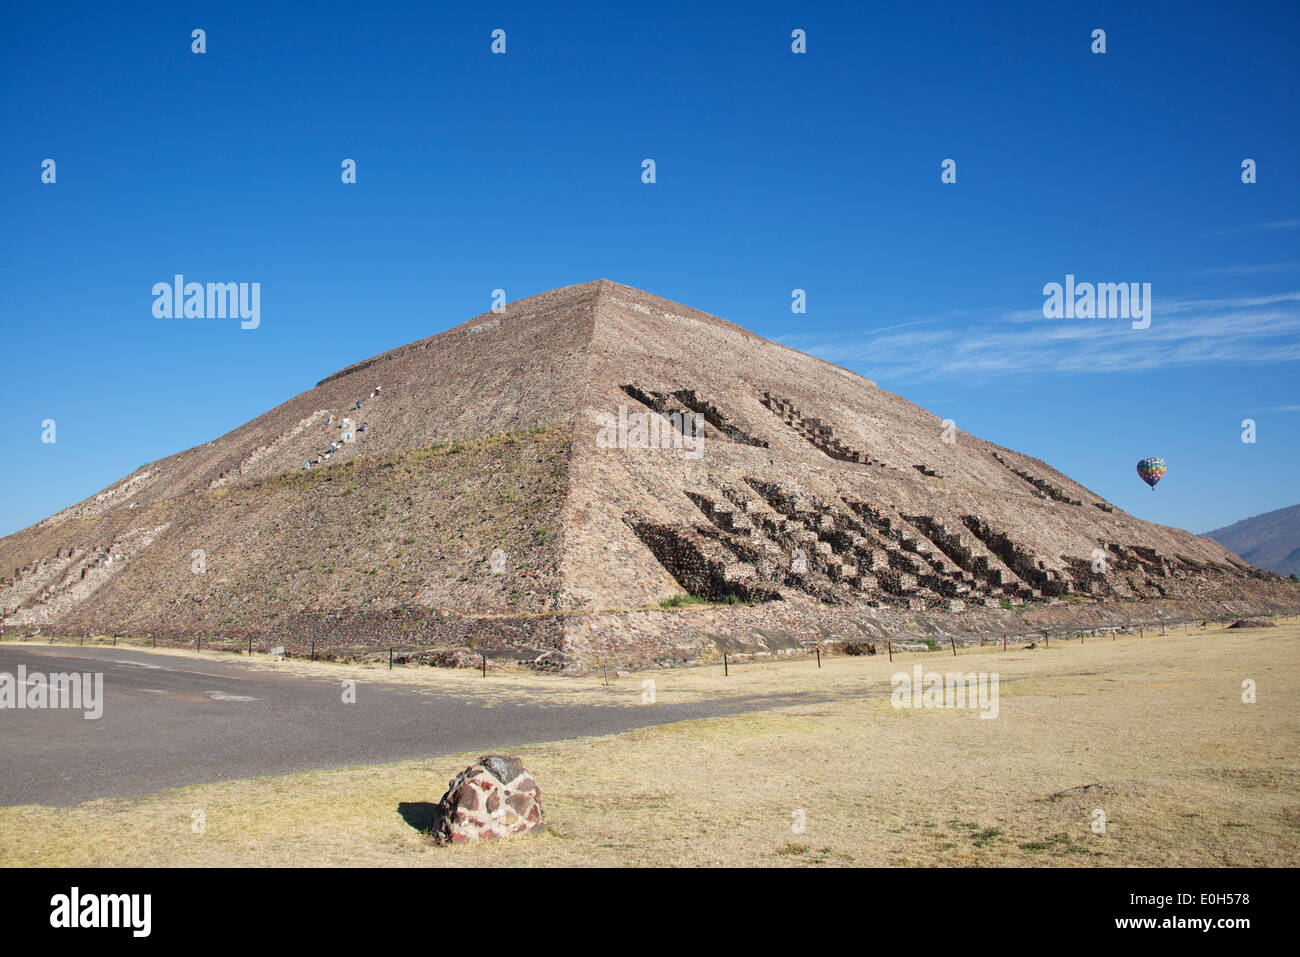 Pyramid of the Sun Teotihuacan Mexico Stock Photo